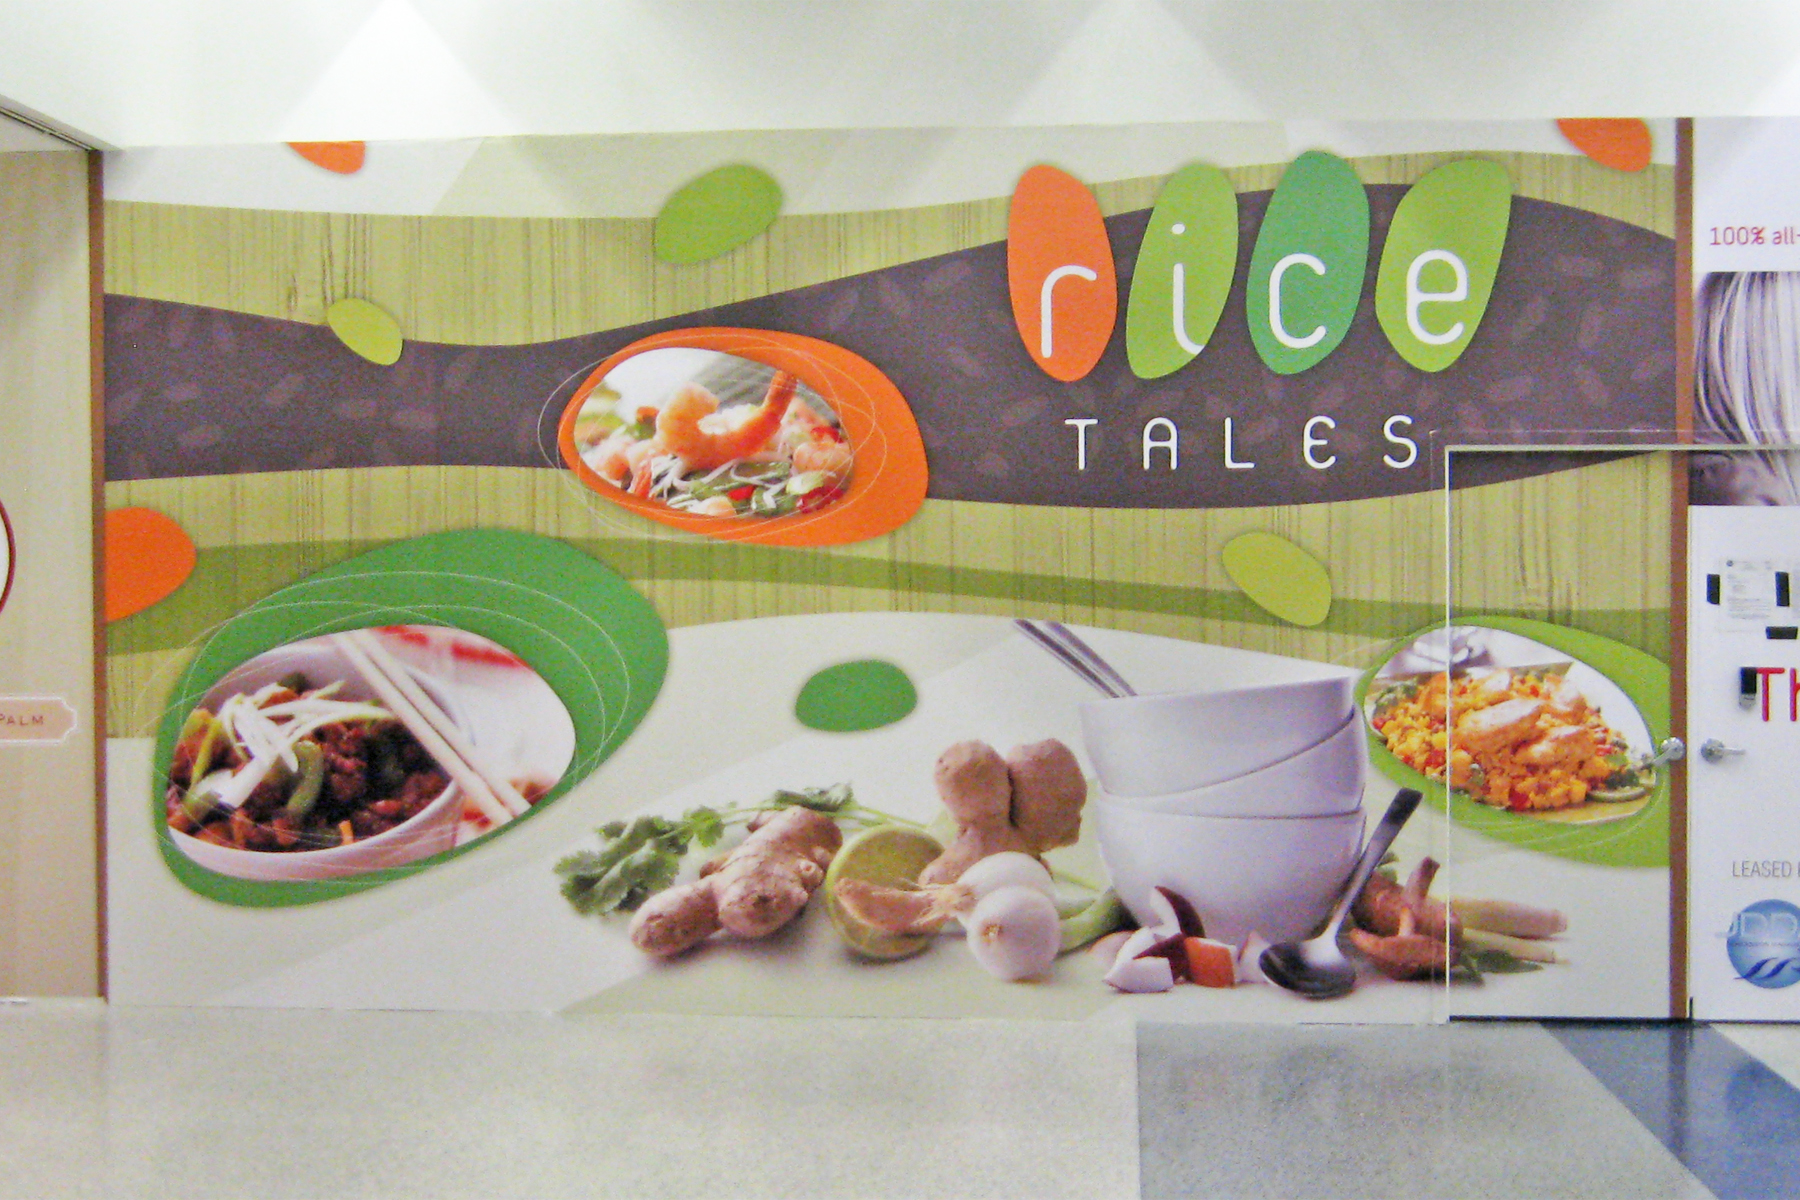 Barricade Wall Graphics at the Airport for an Upcoming Restaurant - Custom Designed and Printed Wall Wraps provide Useful Advertising & Colorful Wall Art while Stores are Under Construction